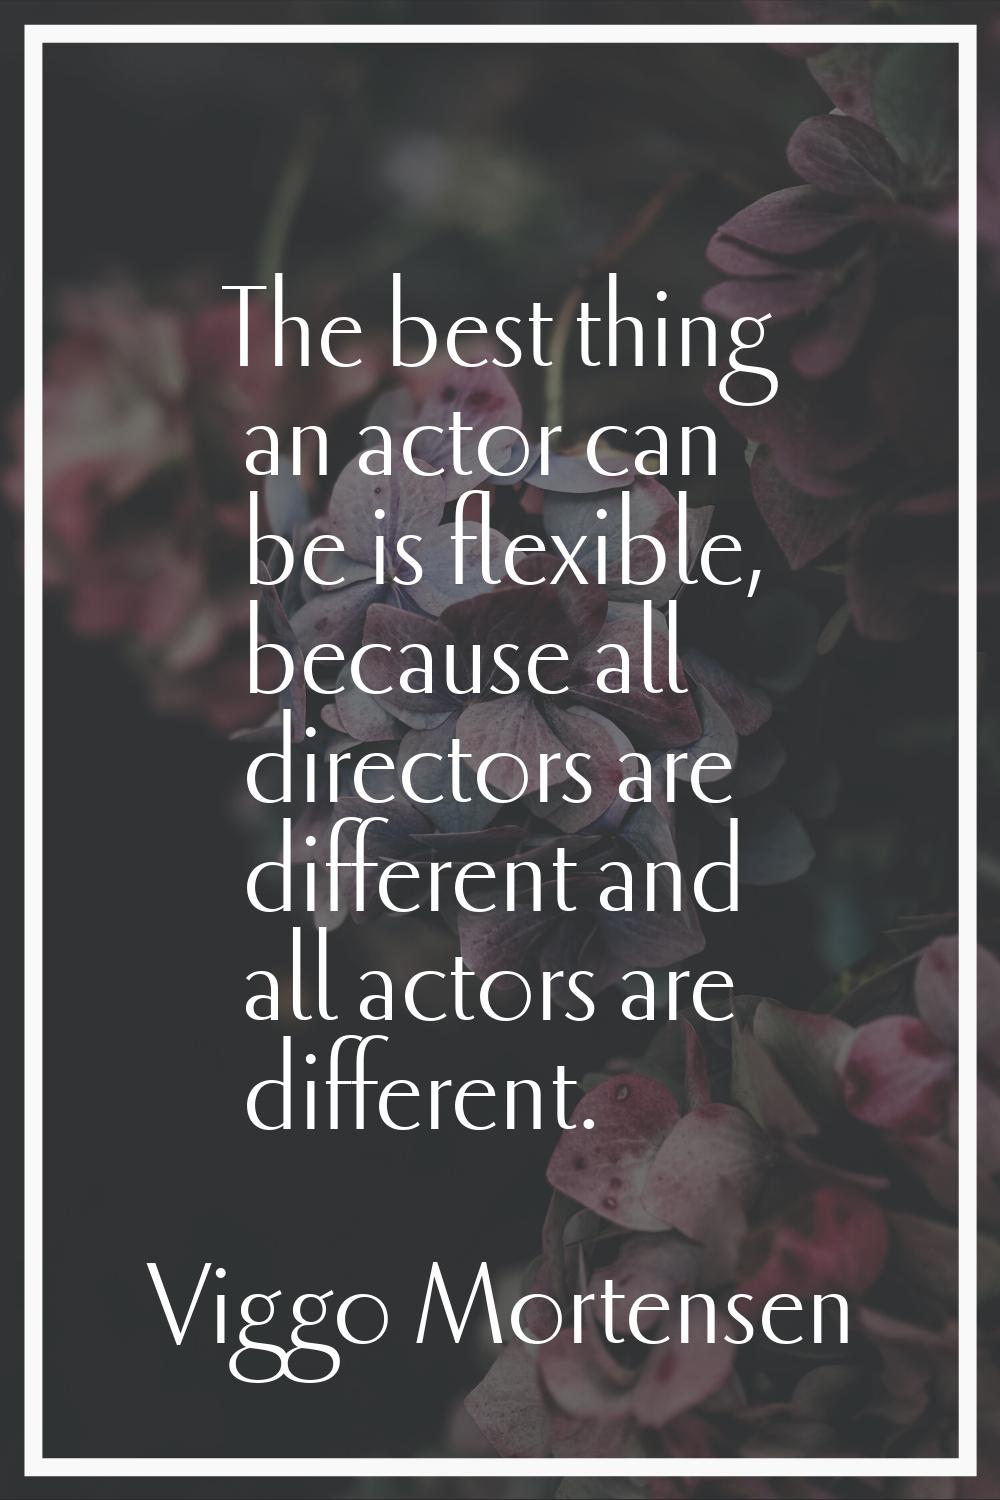 The best thing an actor can be is flexible, because all directors are different and all actors are 